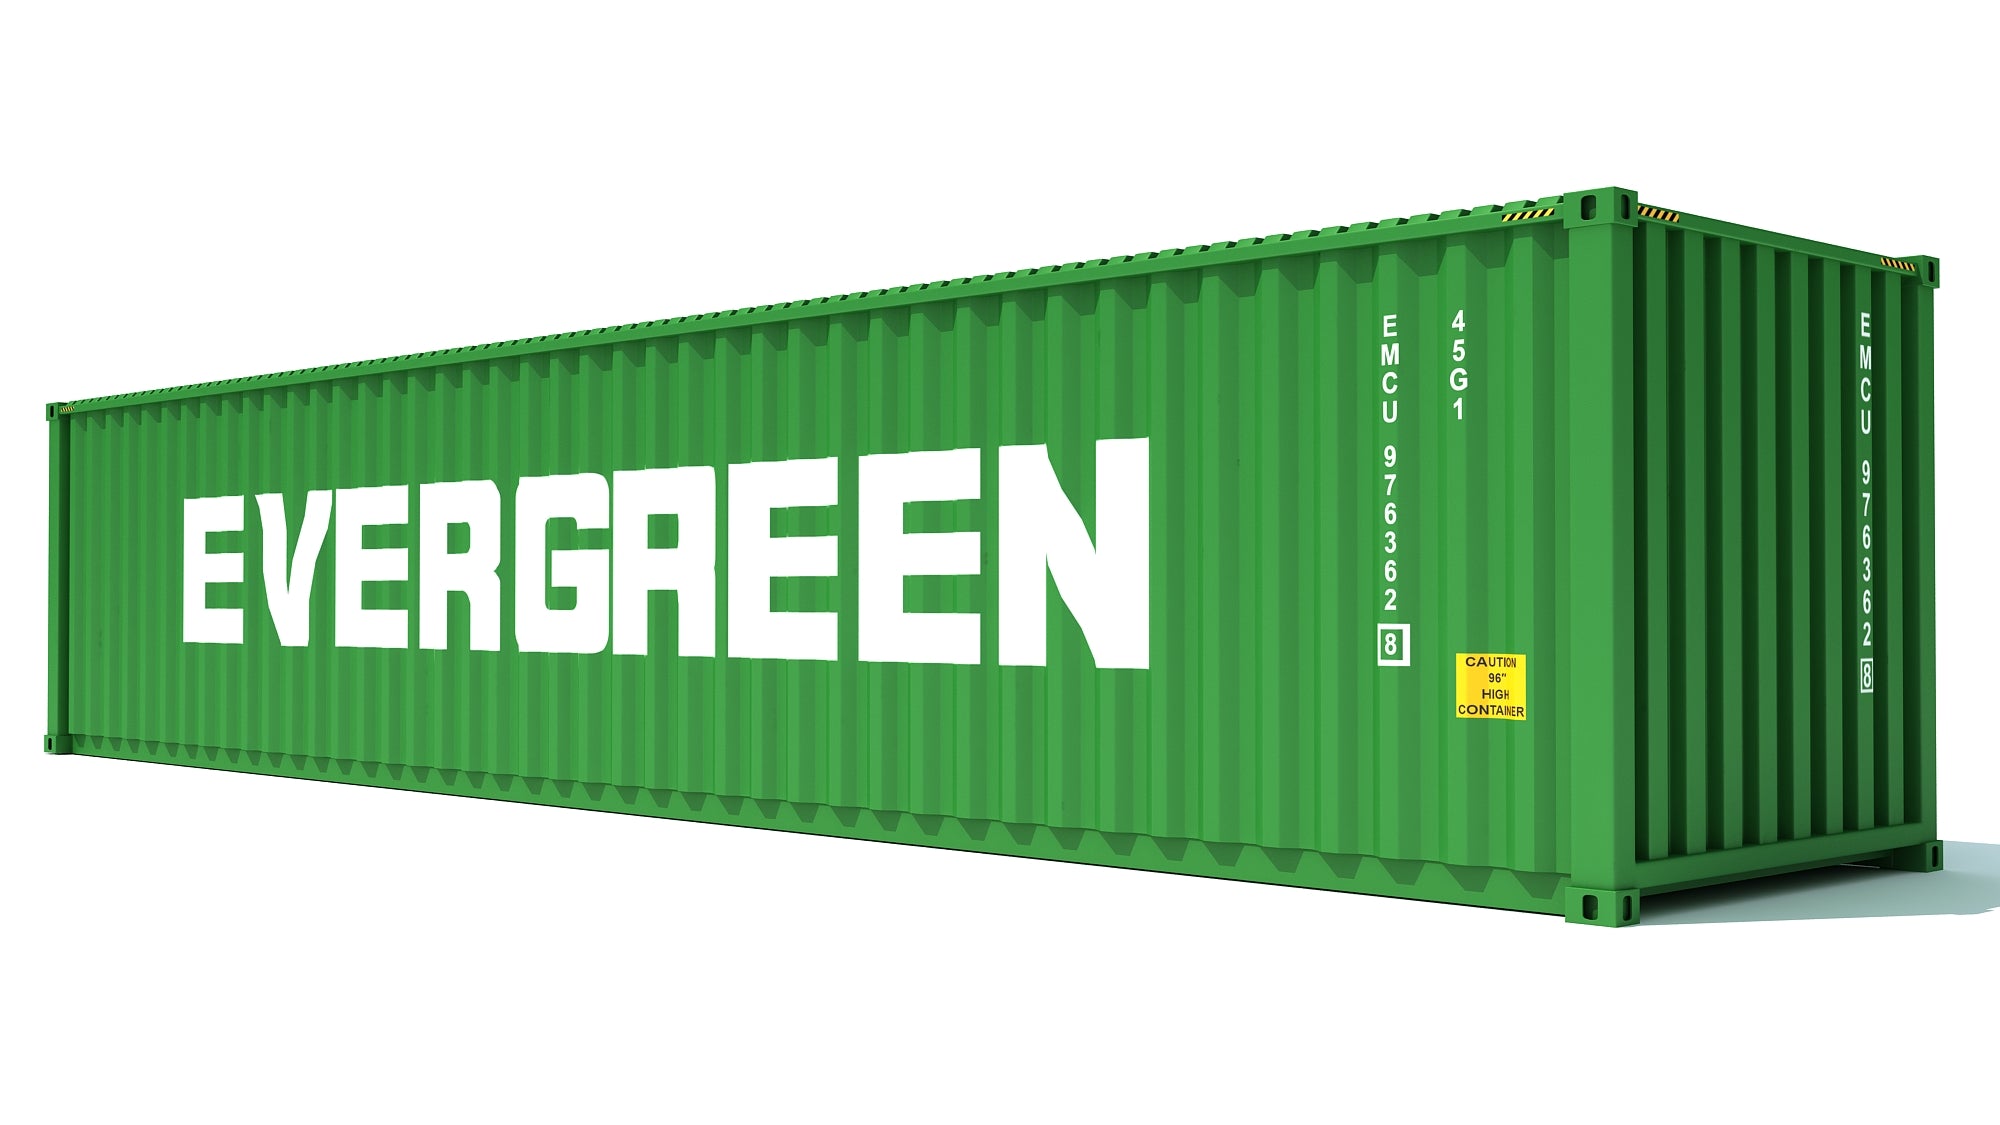 Shipping Container Evergreen